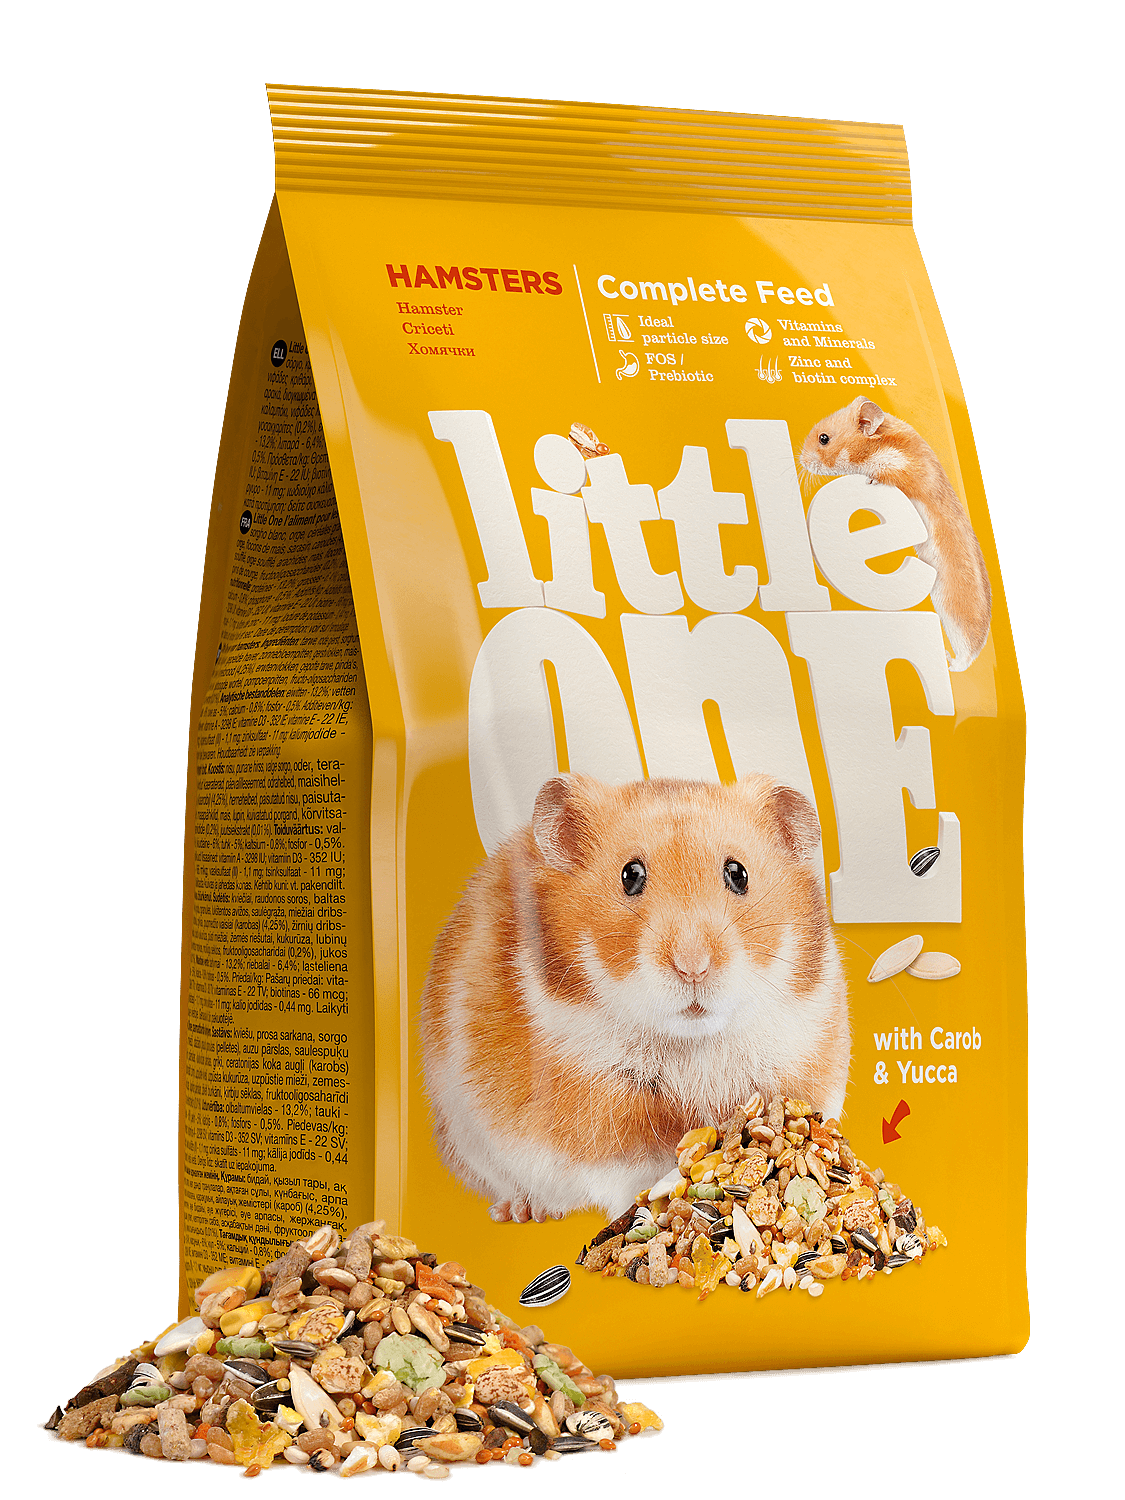 Aliment complet pour hamsters 400g